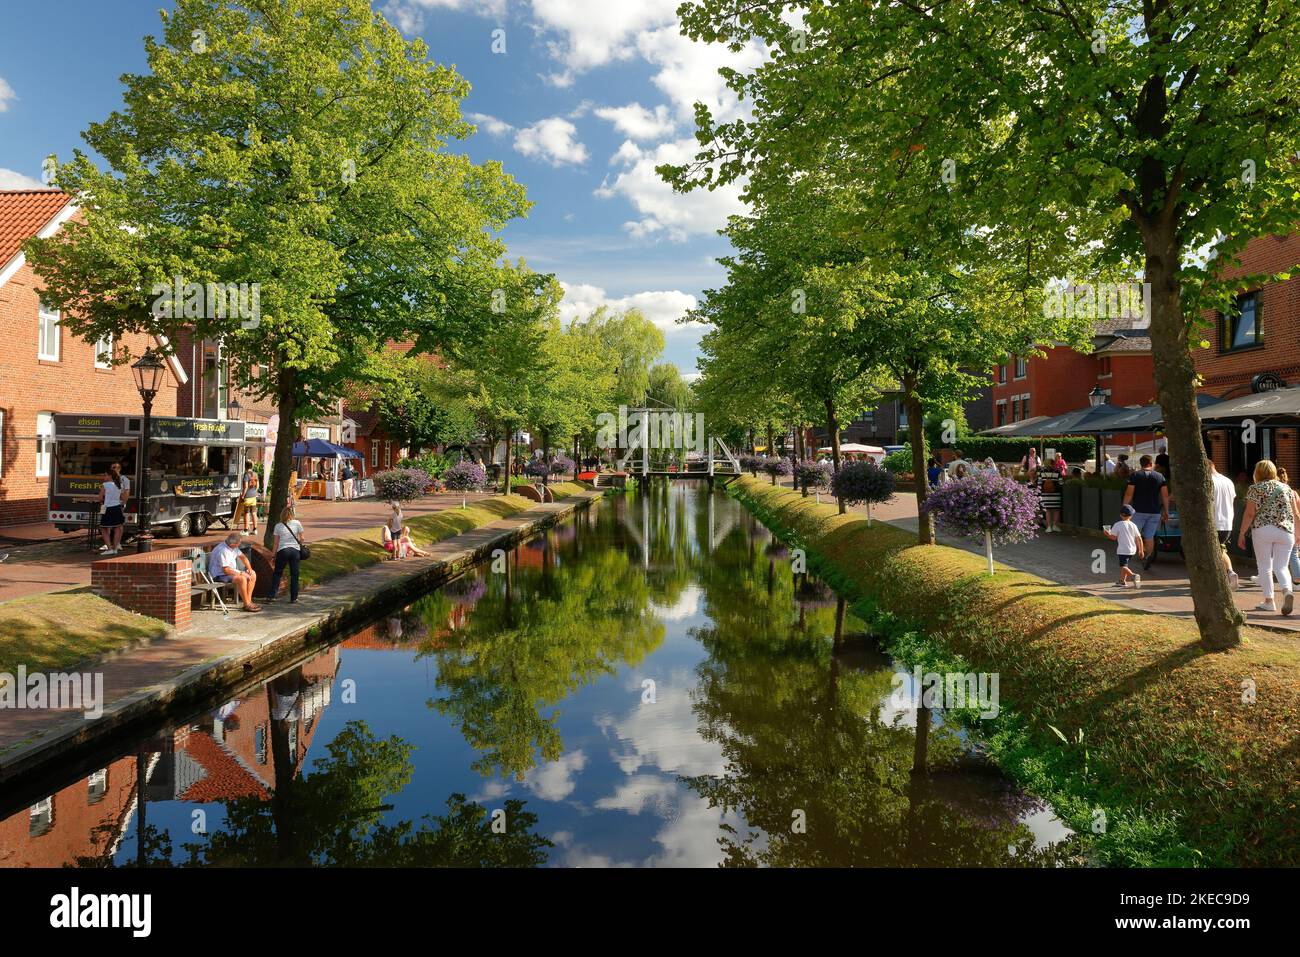 View of the main canal with cafes and restaurants in Papenburg, Papenburg, Emsland, Lower Saxony, Germany Stock Photo